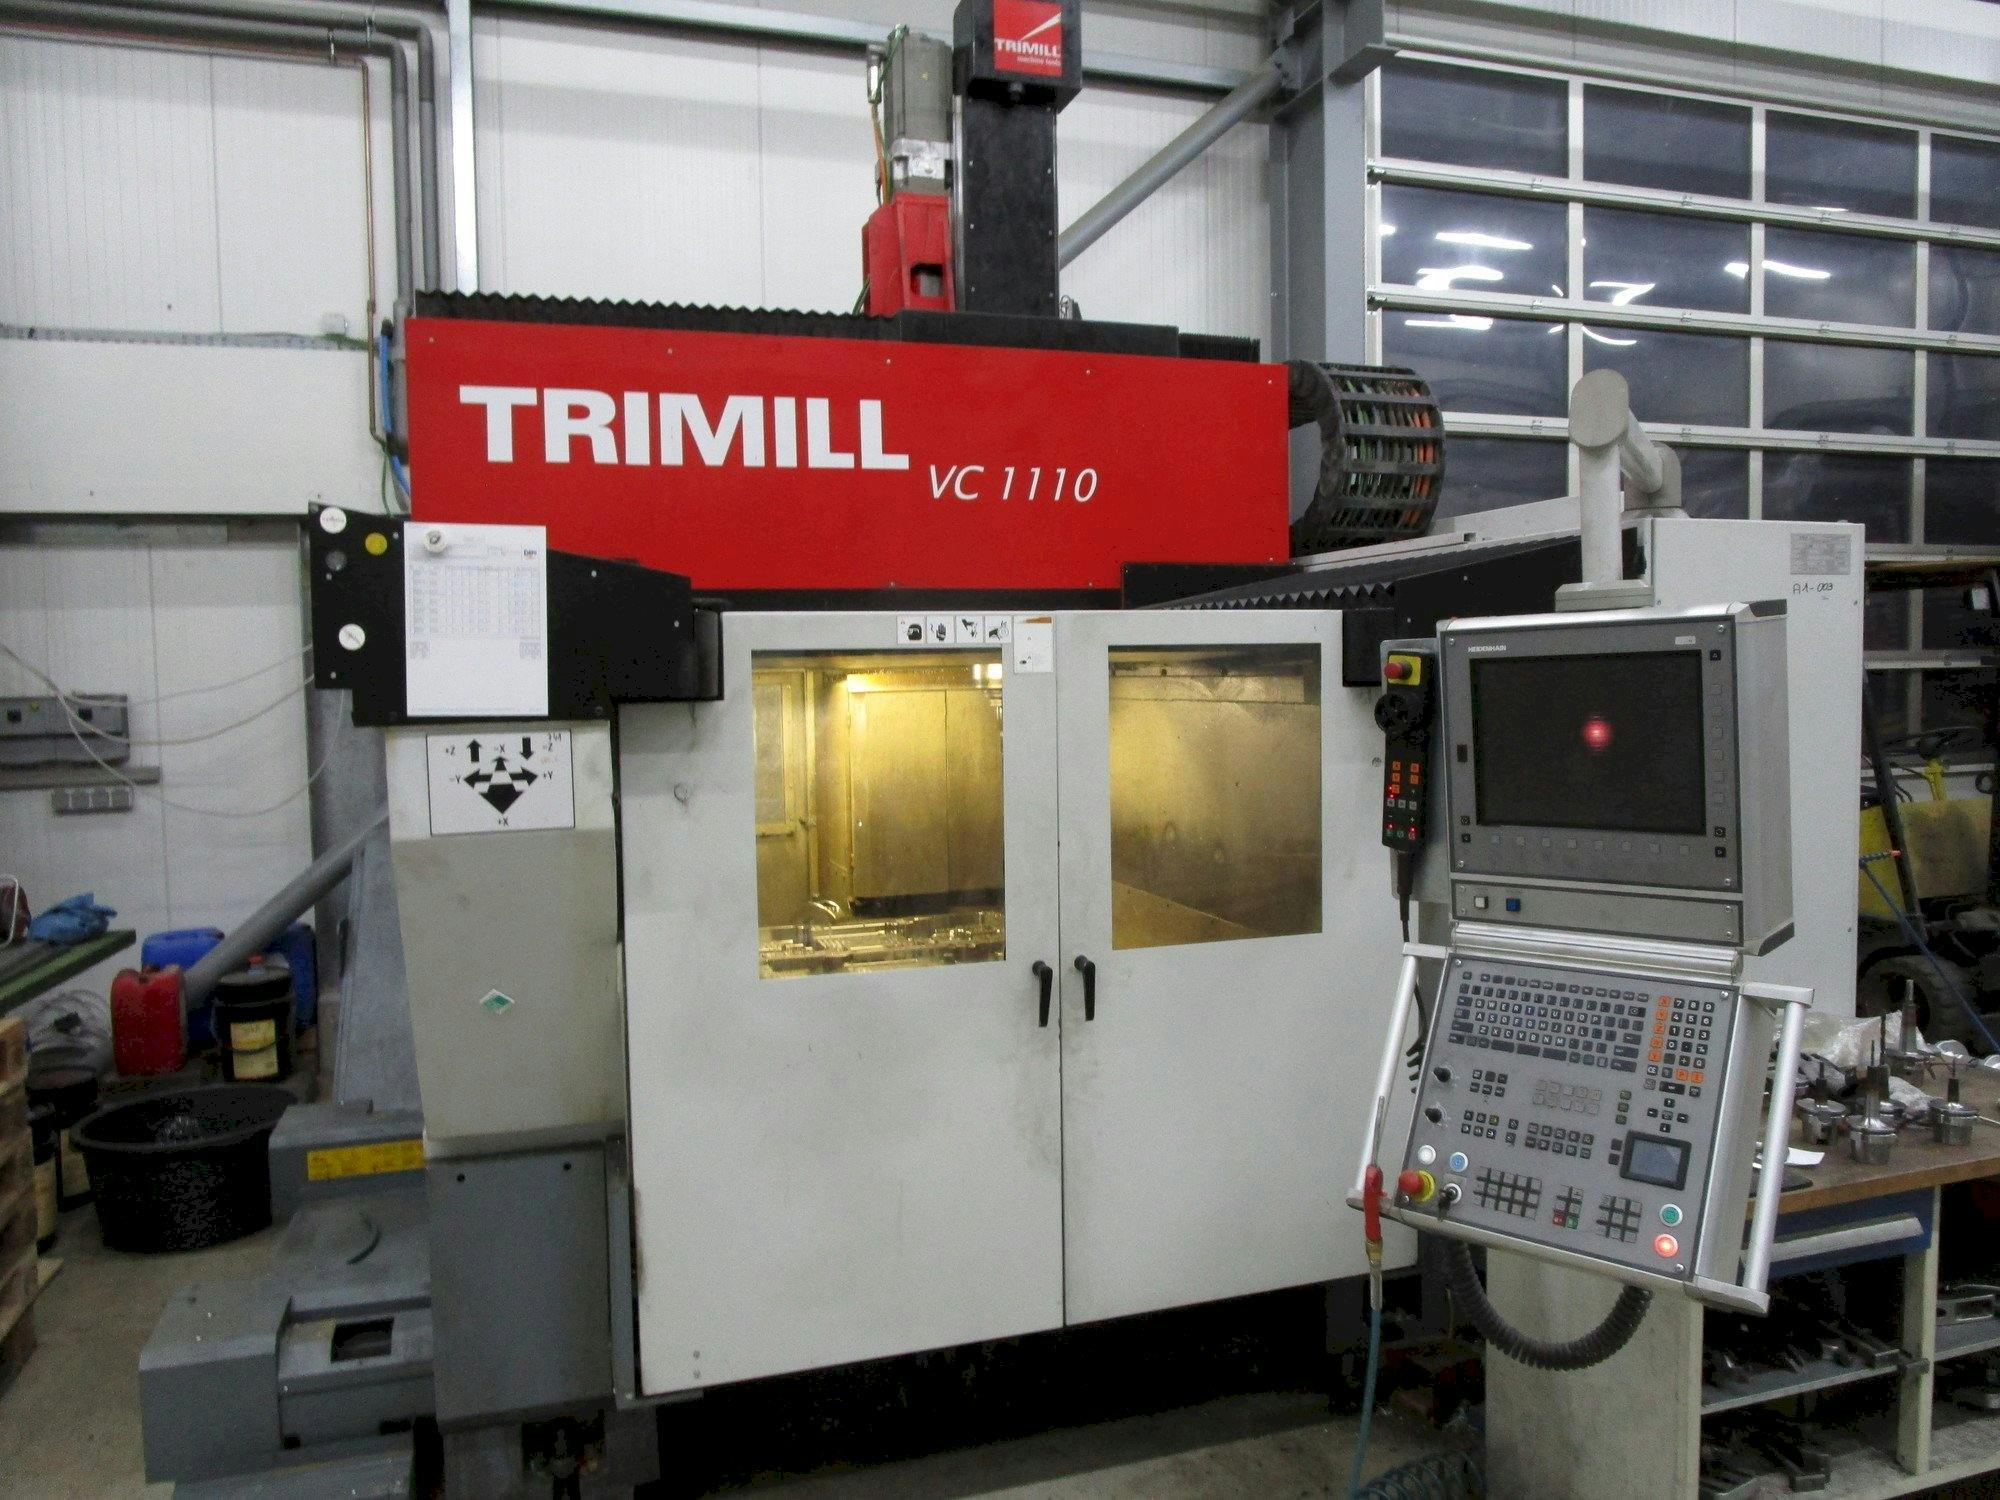 Front view of TRIMILL VC1110  machine